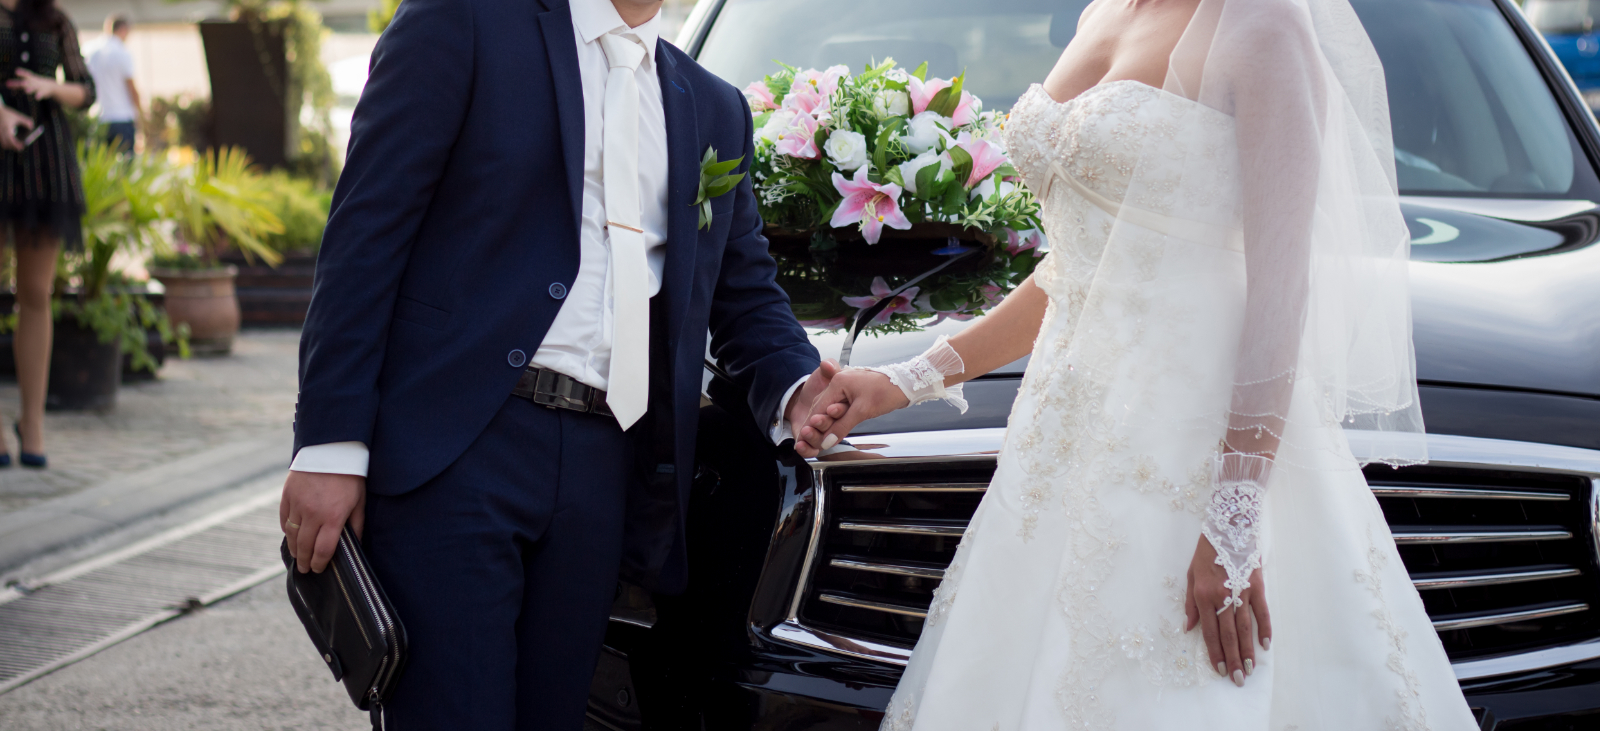 Make Your Big Day Magical By Hiring Wedding Limo Transportation